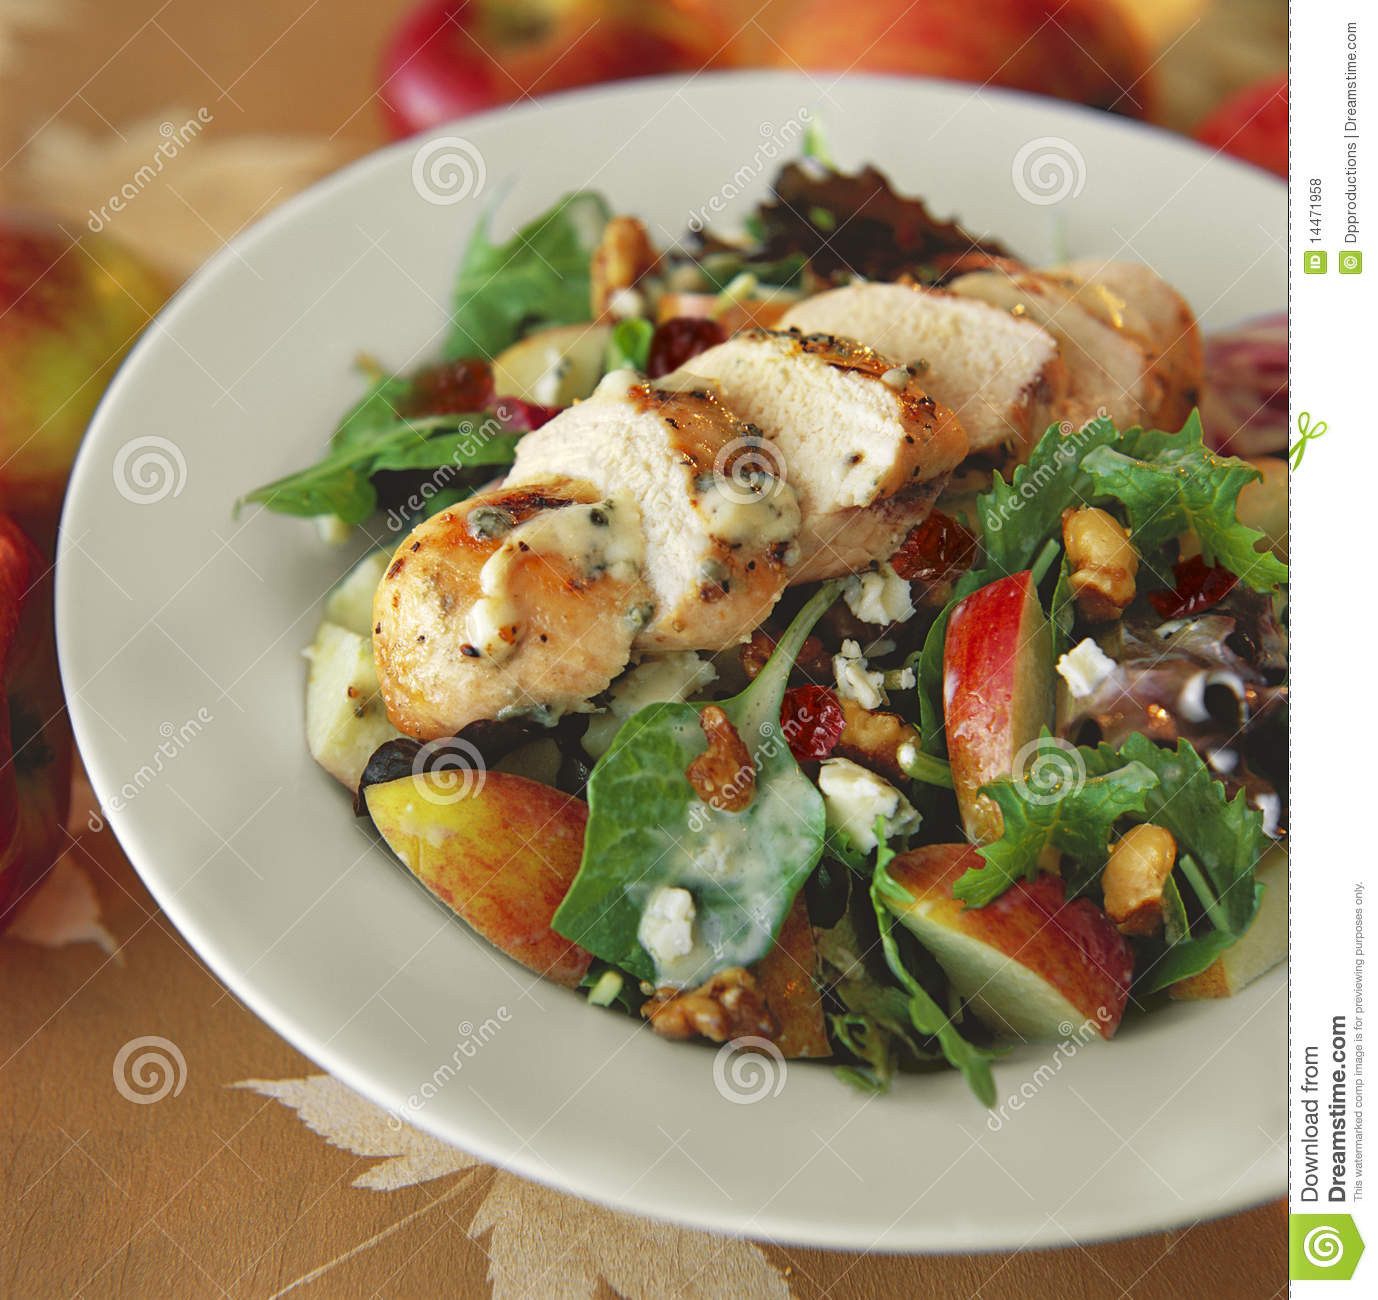 Gourmet Chicken Salad Lovely Gourmet Chicken Salad Stock Photo Image Of Healthy